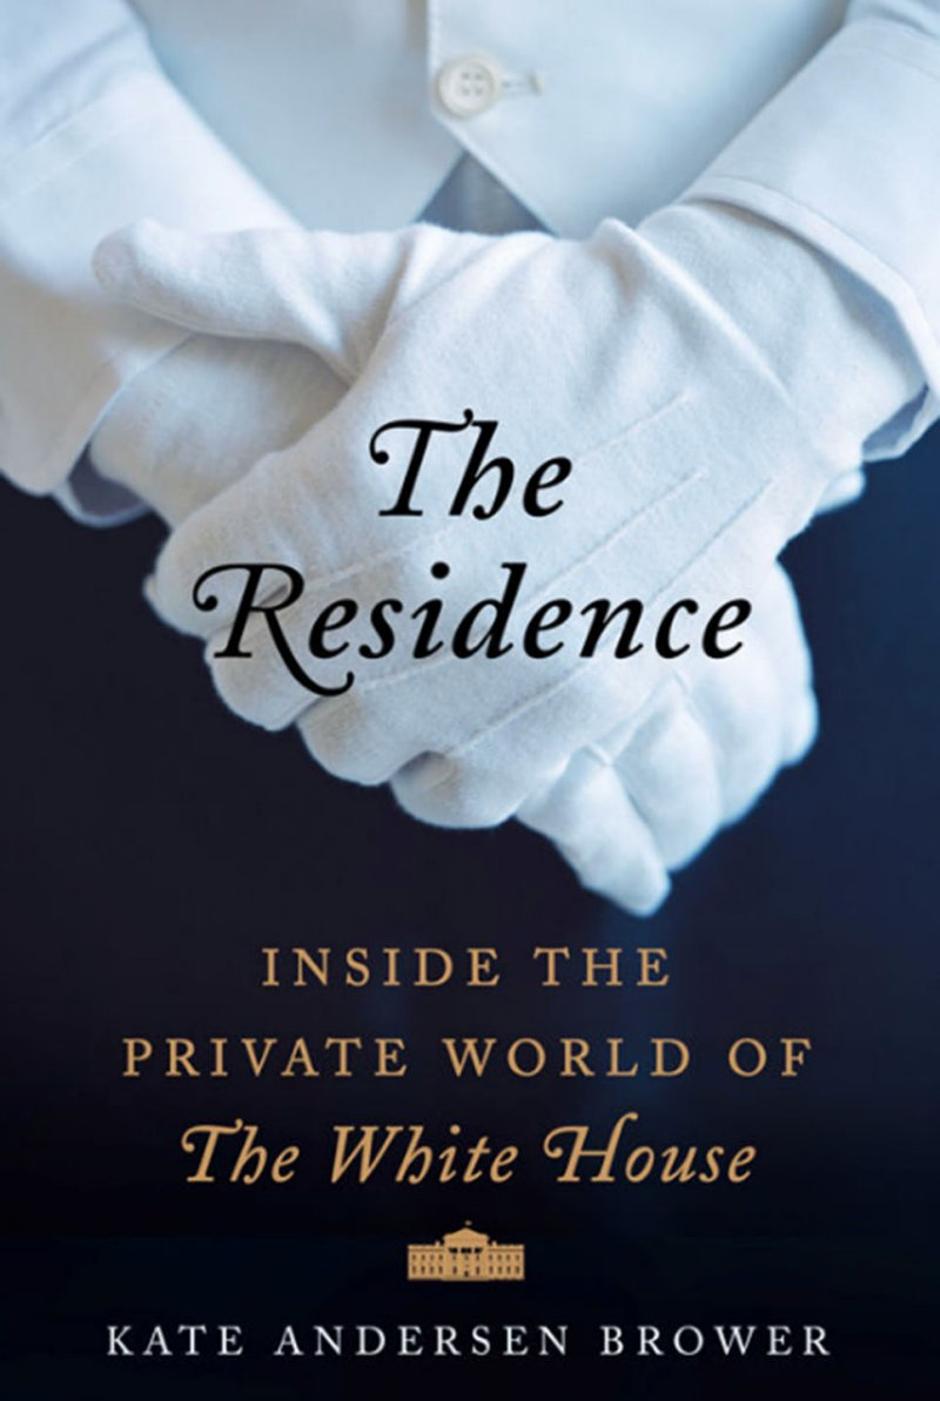 The Residence: Inside the Private World of The White House | Author: Amazon